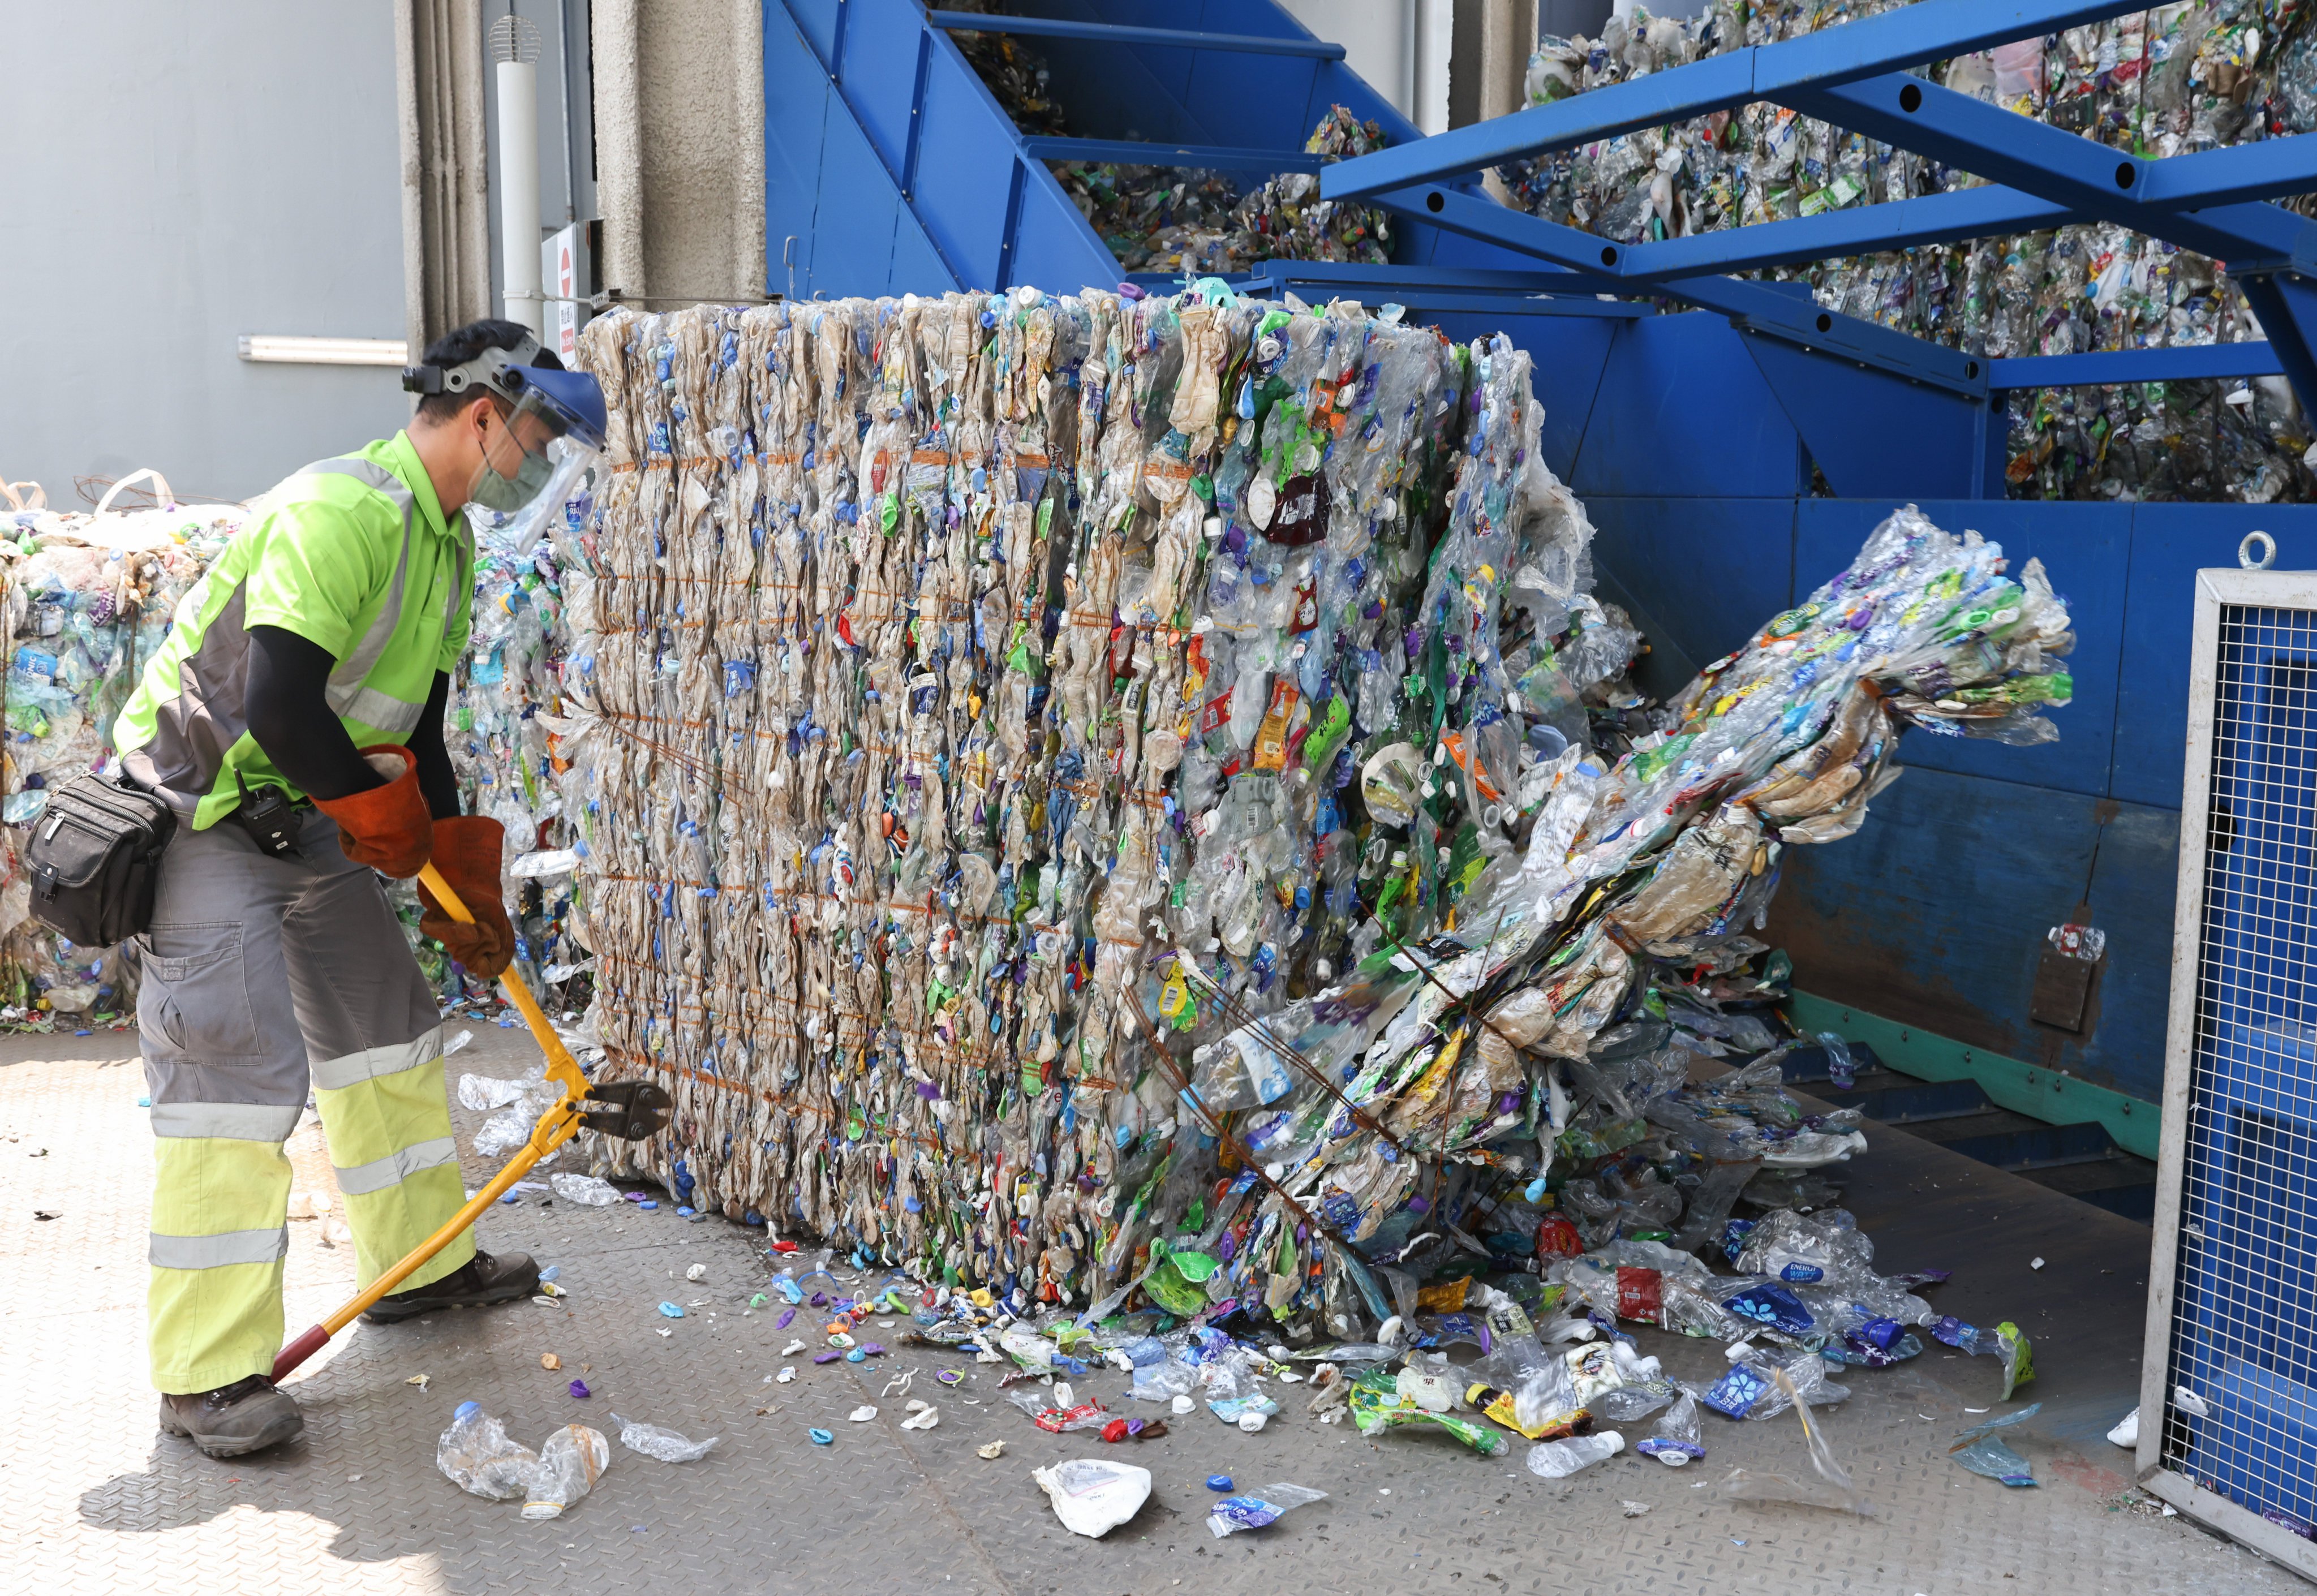 A worker transfers recycled plastic bottles to a bale breaker at New Life Plastics’ facility at EcoPark at Tuen Mun on September 6, 2022. The plant ceased operations in April after consistently running well below capacity because there were not enough plastic bottles to recycle. Photo: K.Y. Cheng